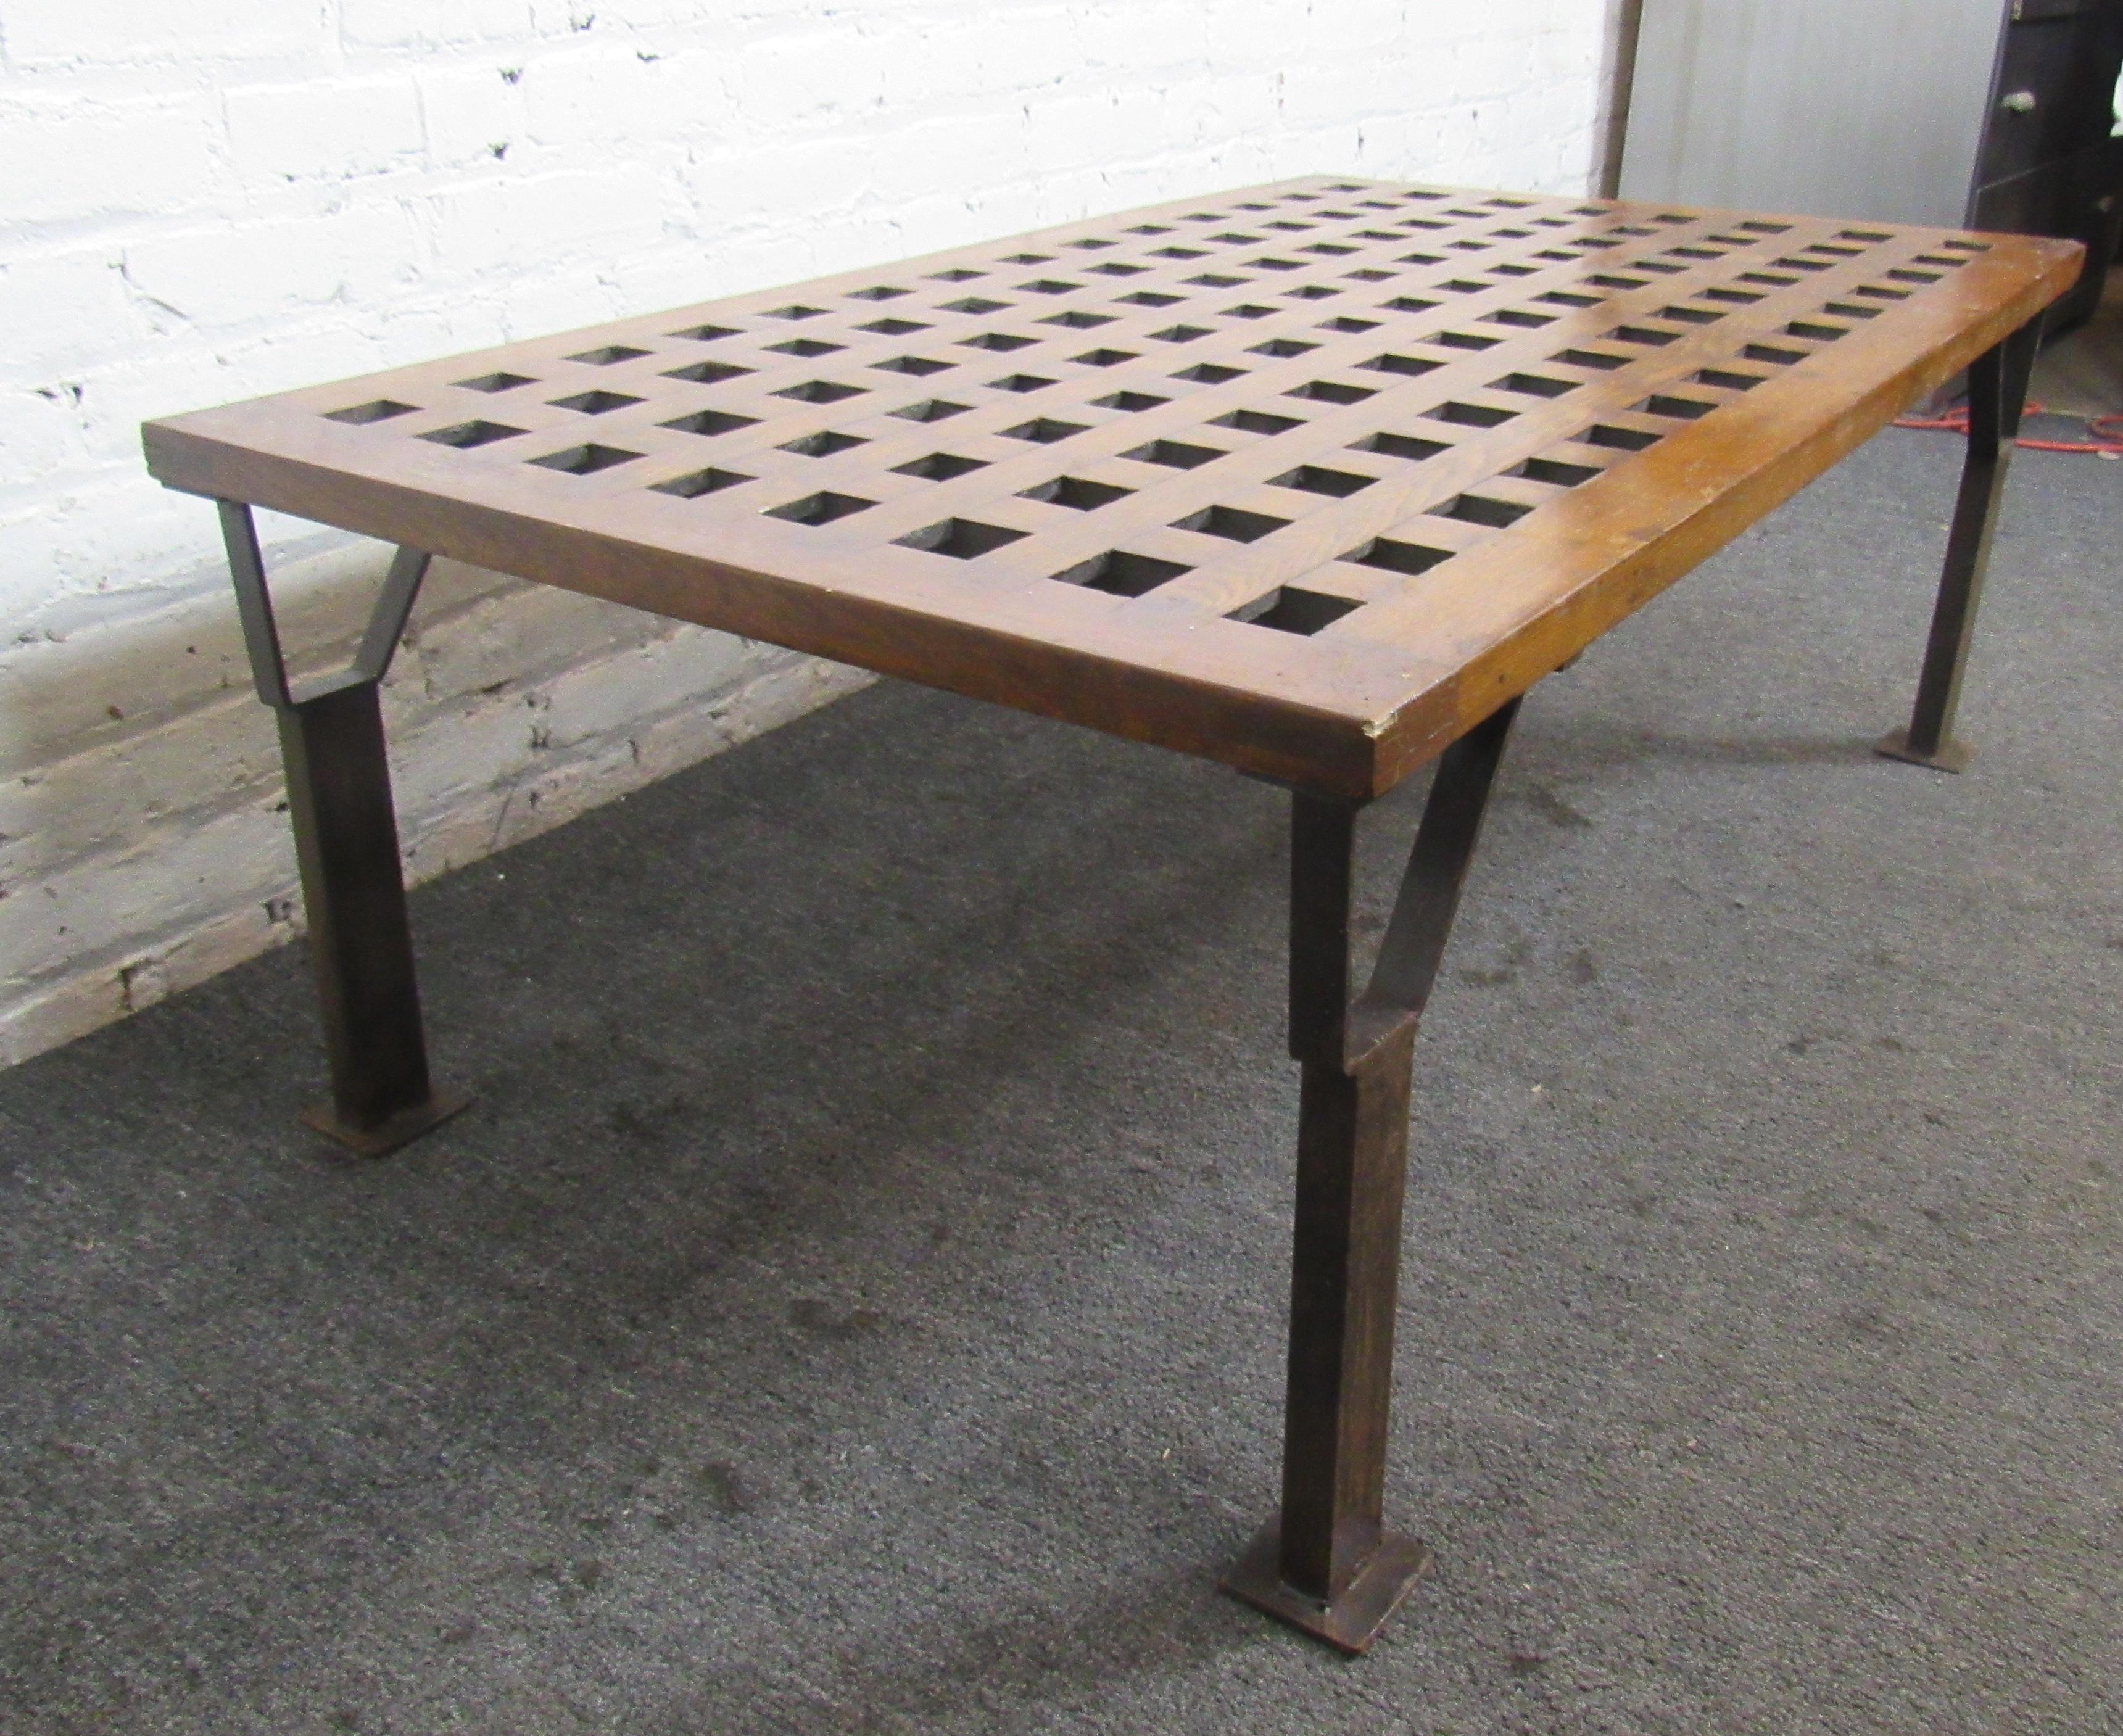 Long coffee table with grid top and iron leg base.
Location: Brooklyn NY.